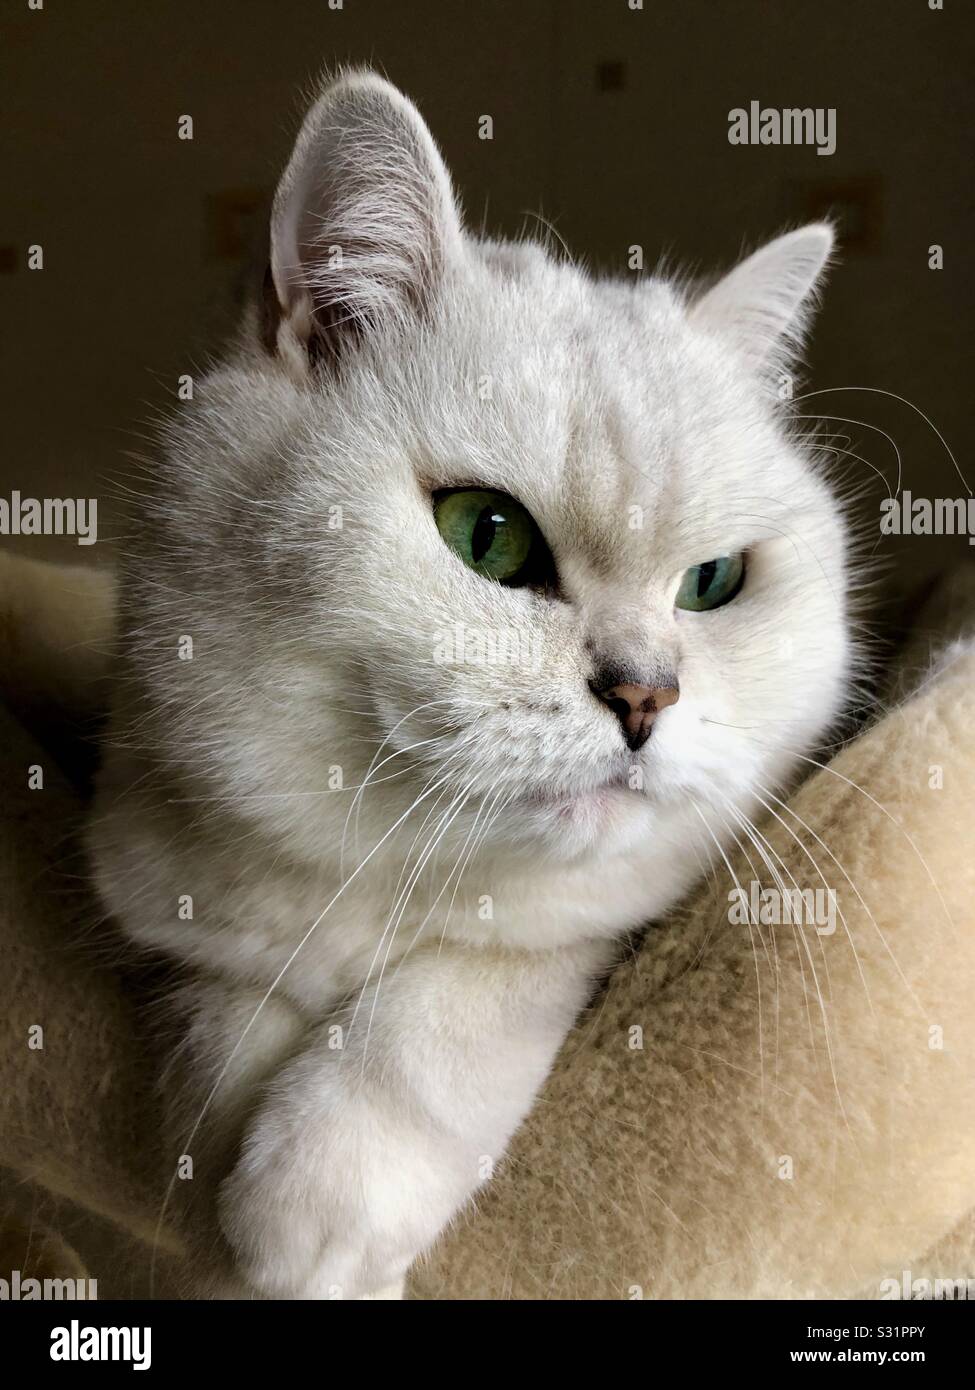 Green eyed black tipped white British shorthair cat resting in bed Stock Photo